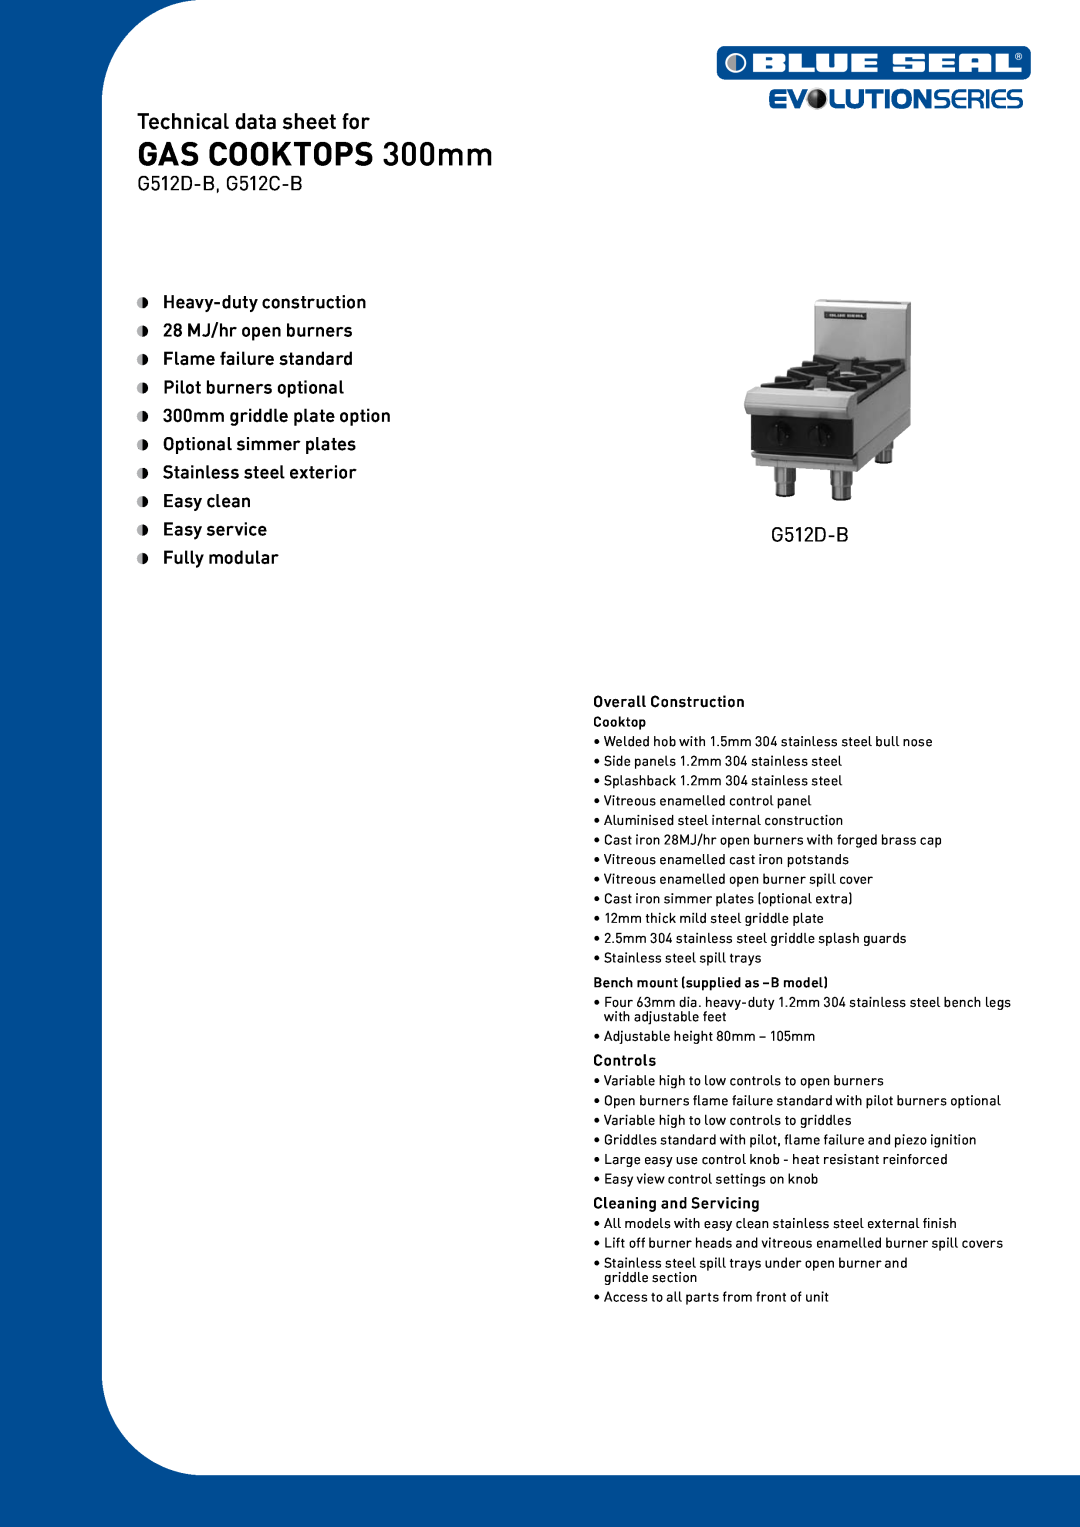 Moffat G512D-B manual GAS COOKTOPS 300mm, Technical data sheet for, Overall Construction, Controls, Cleaning and Servicing 